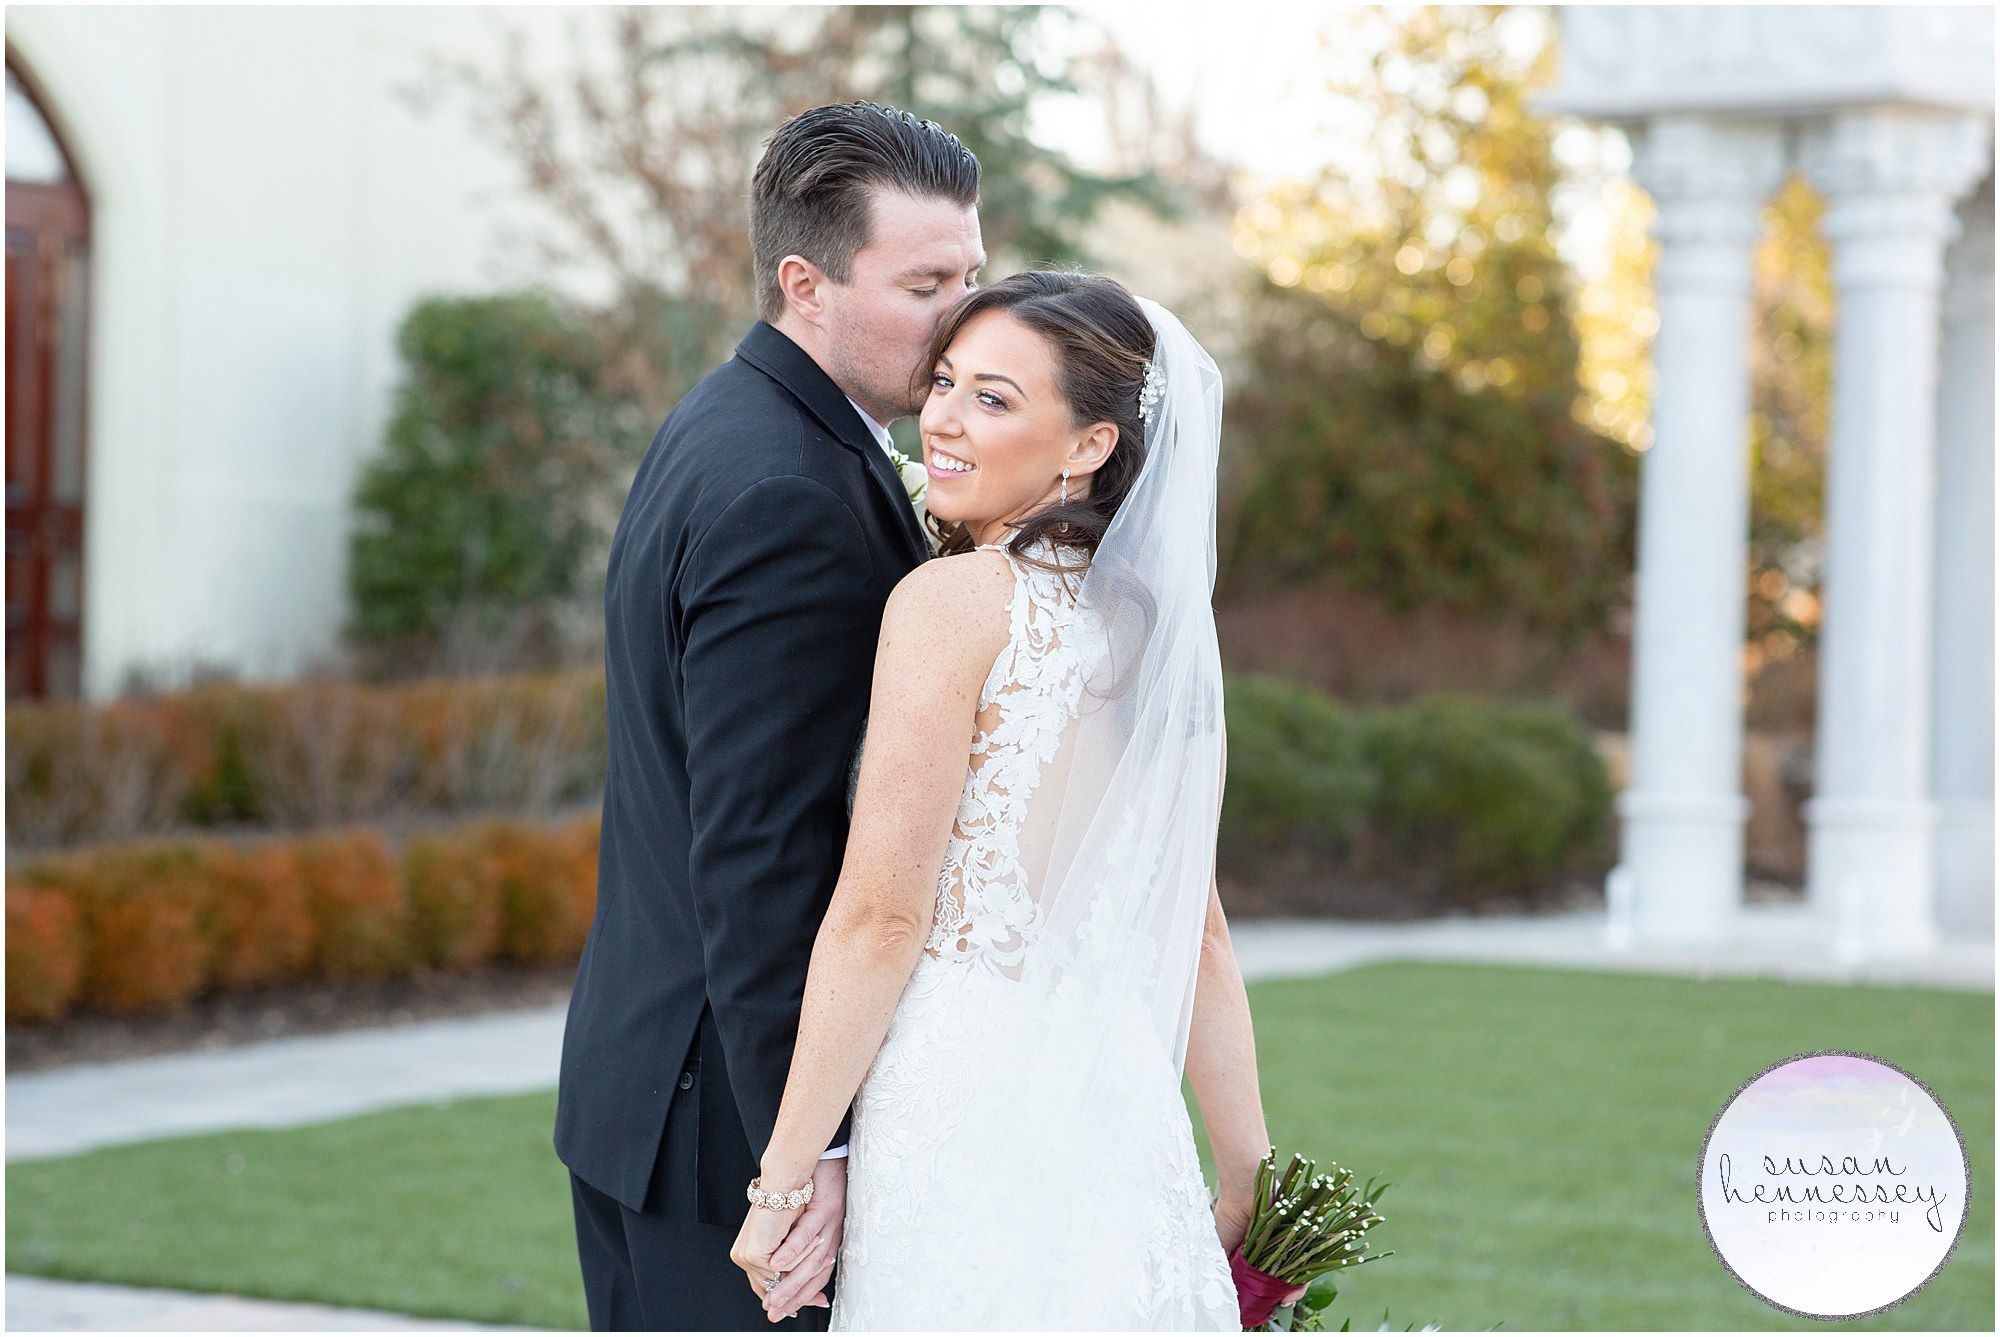 Winter wedding portraits at the beautiful The Merion in Cinnaminson, NJ